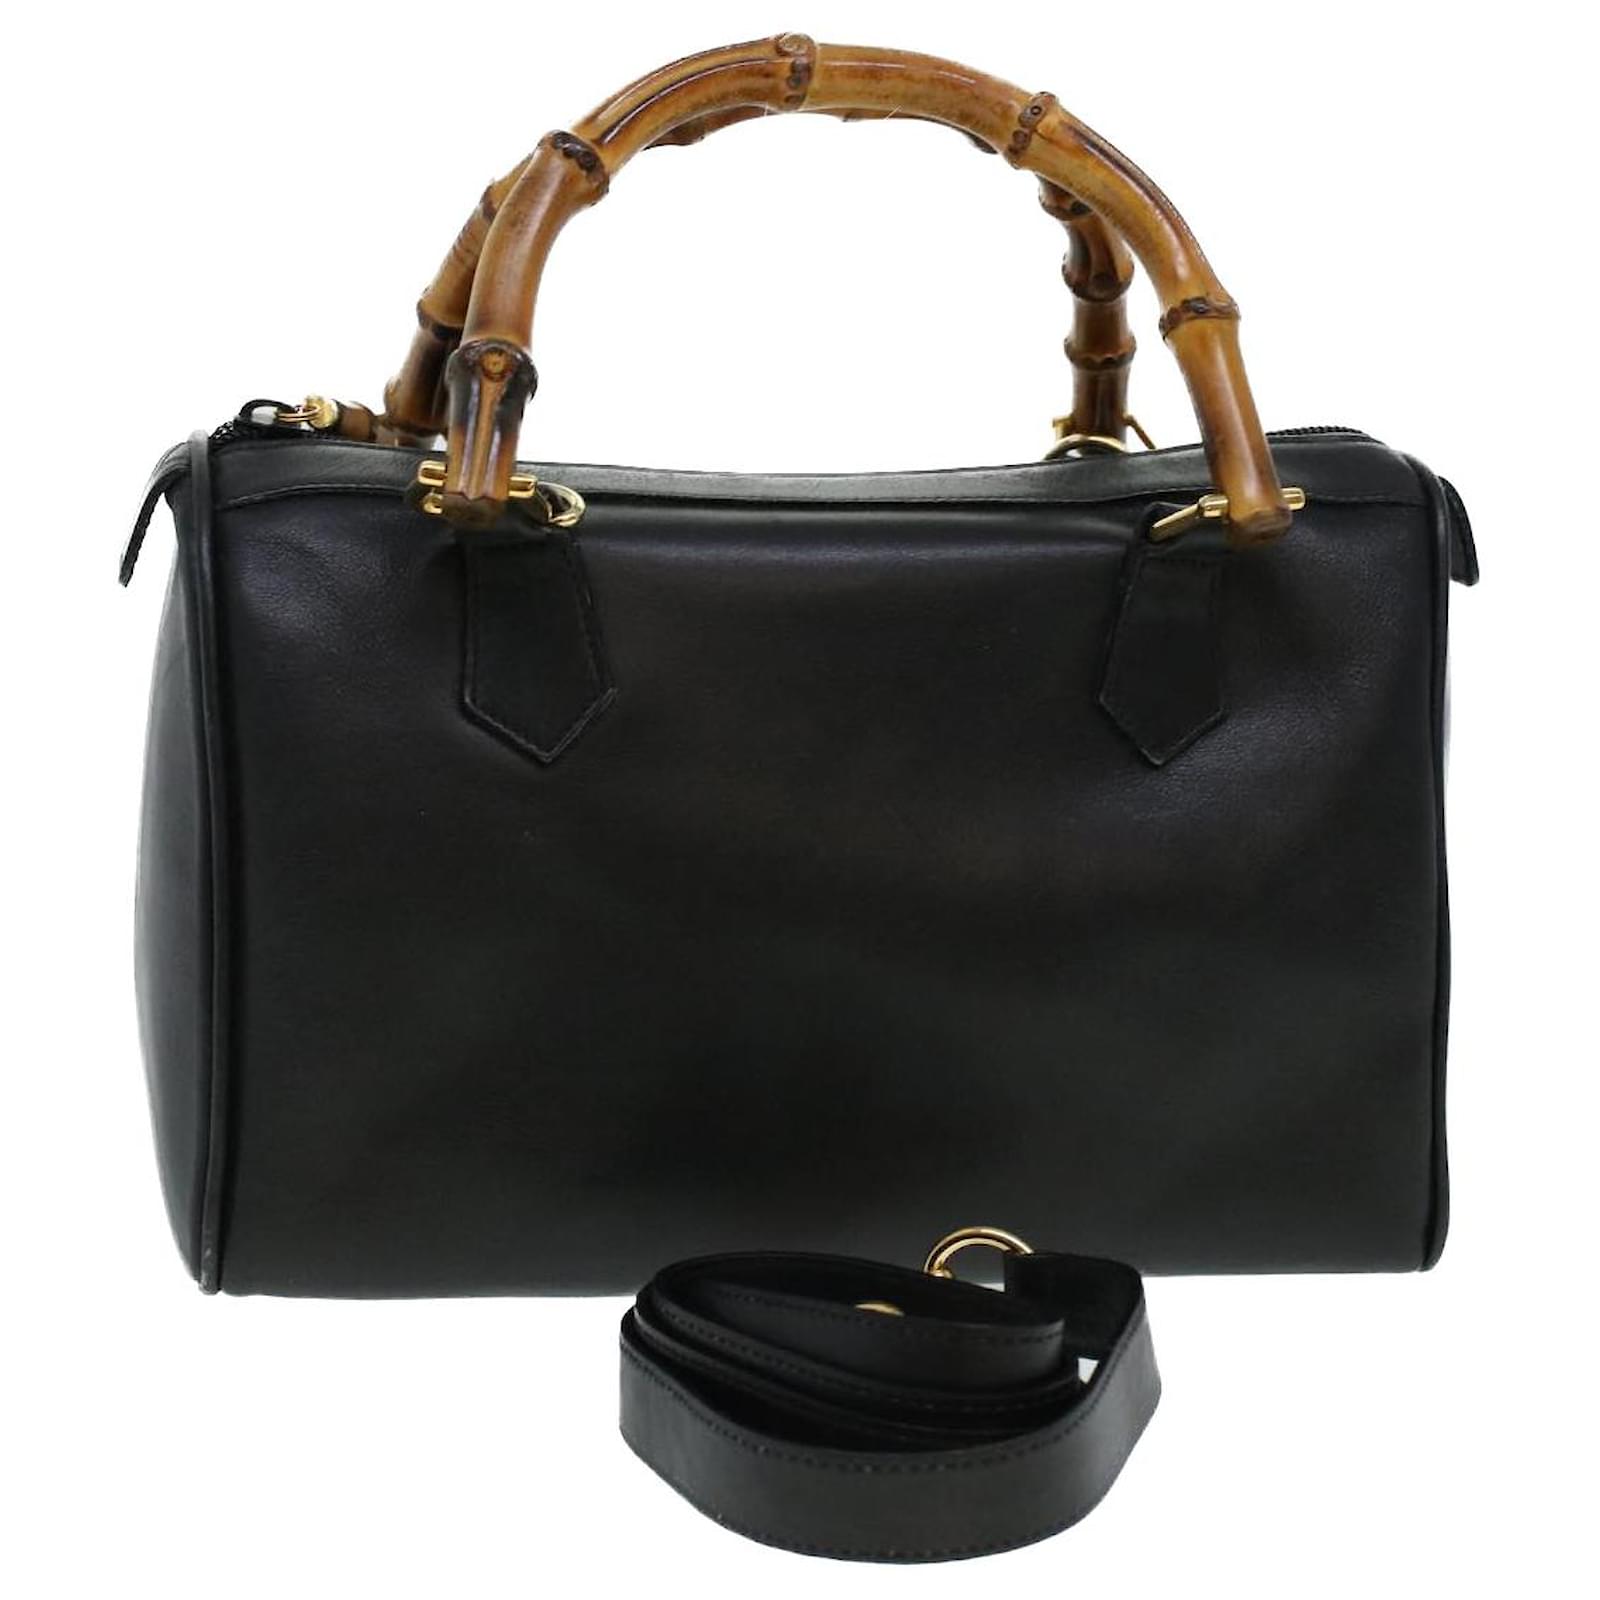 GUCCI Bamboo Hand Bag Leather 2way Black 000.122.0294 auth 41266